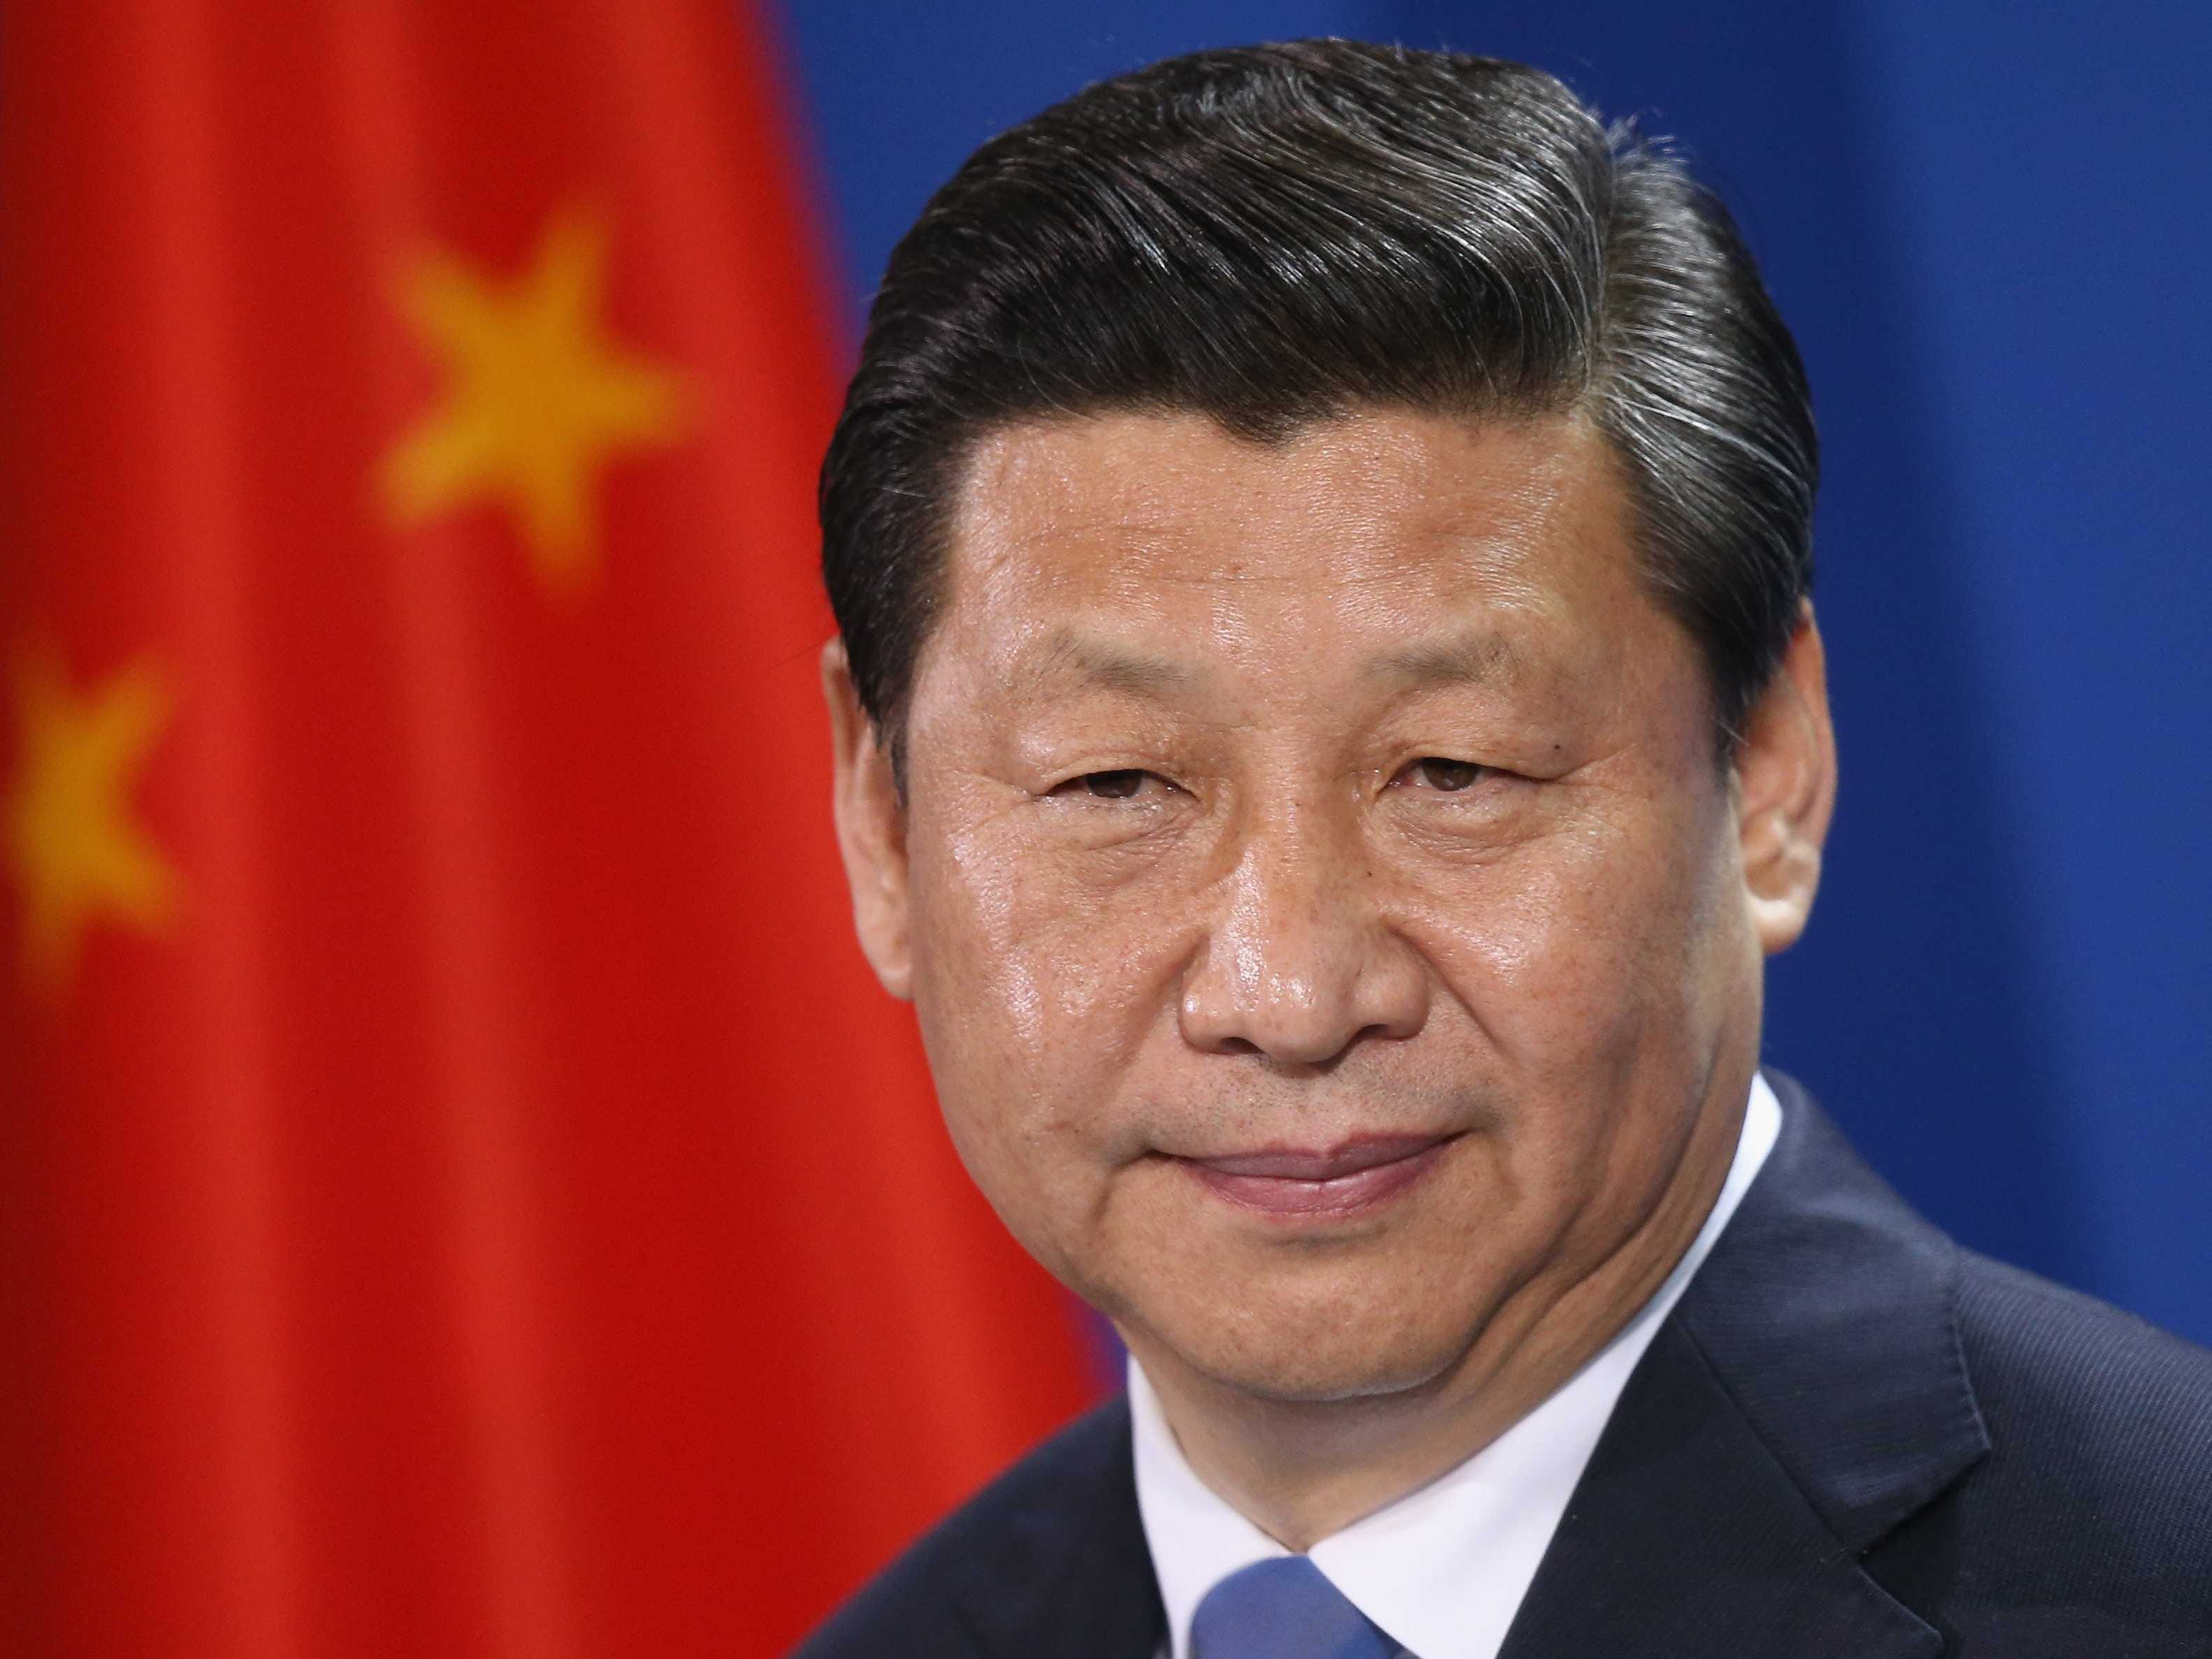 Xi has just his first move against Wall Street China - Business Insider